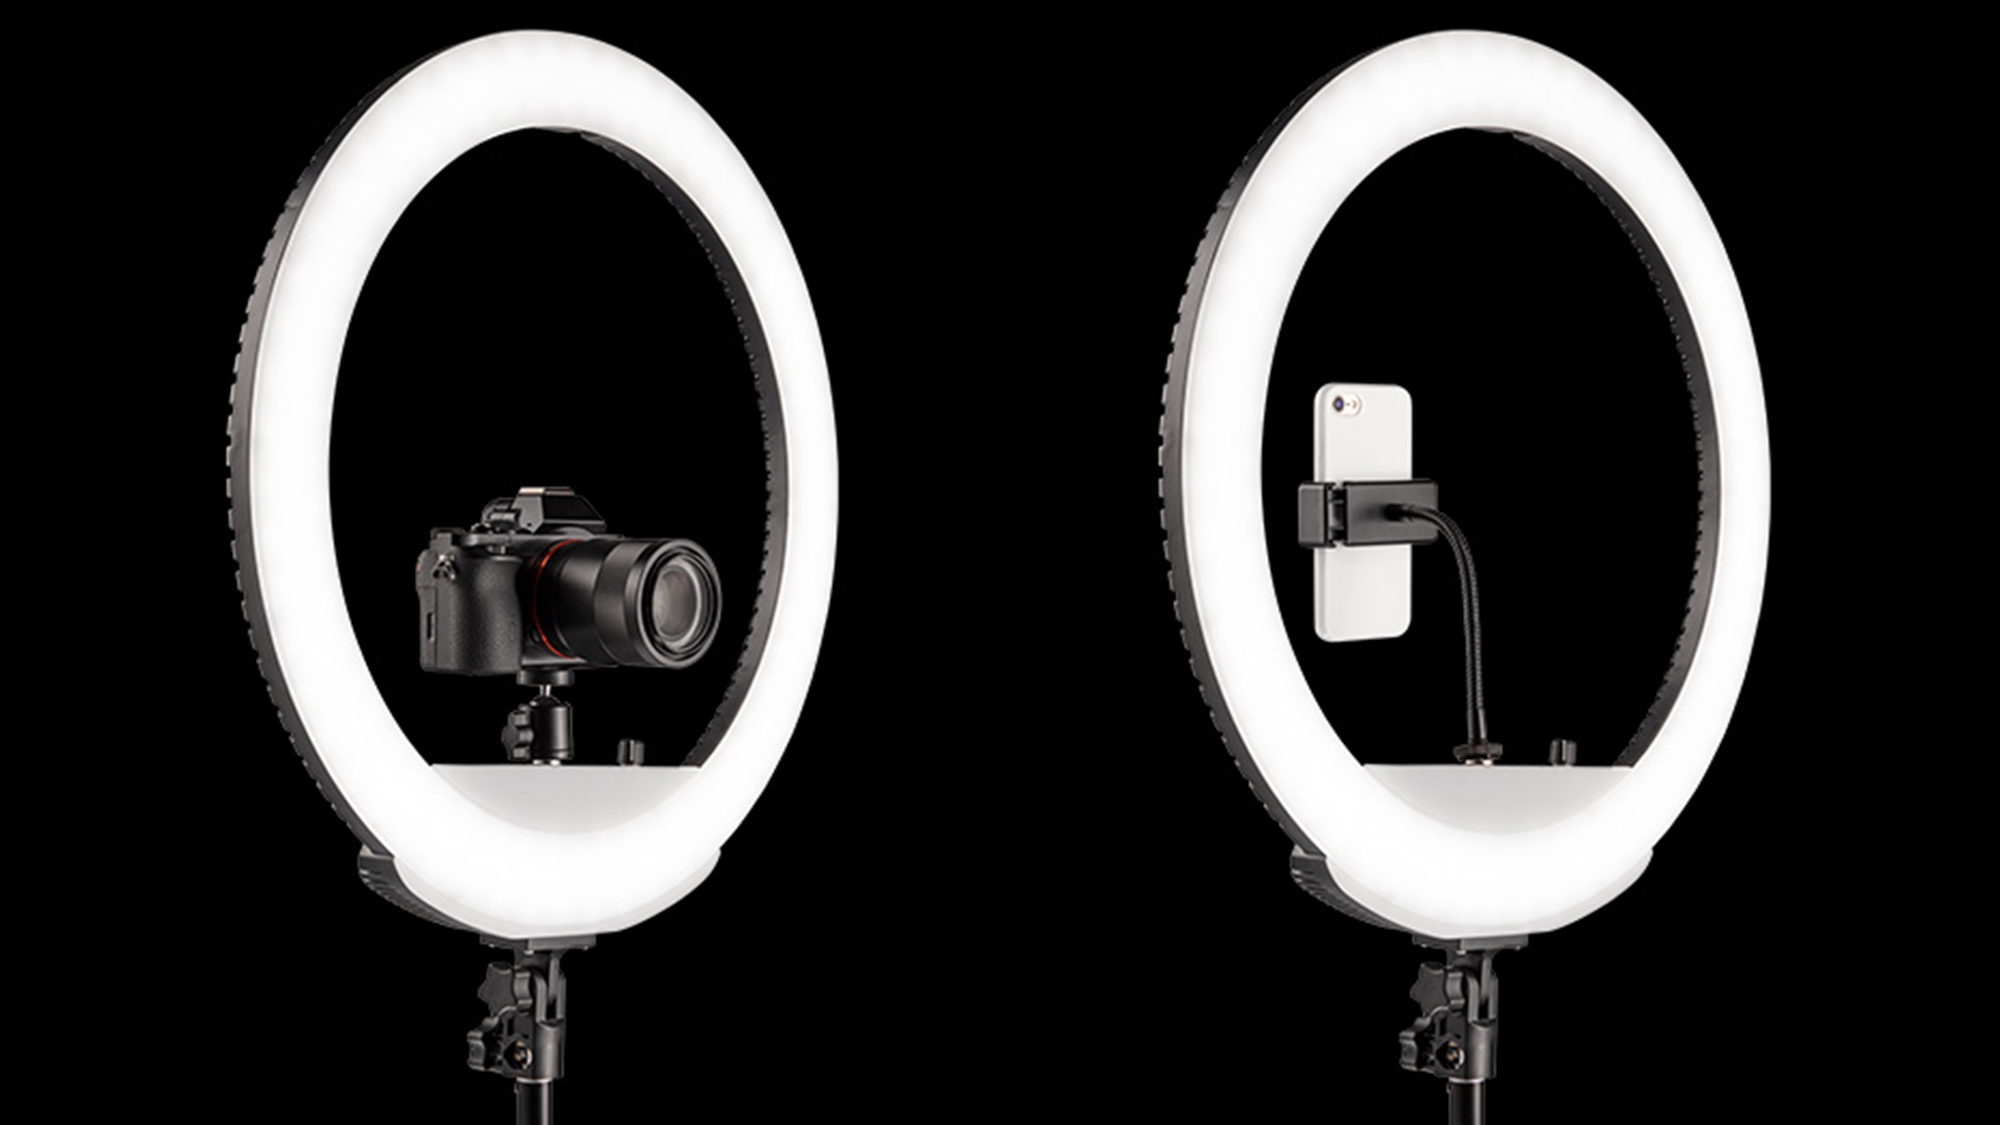 Ringlight 14inch Led Selfie Light With Remote and Tripod Top Quality 